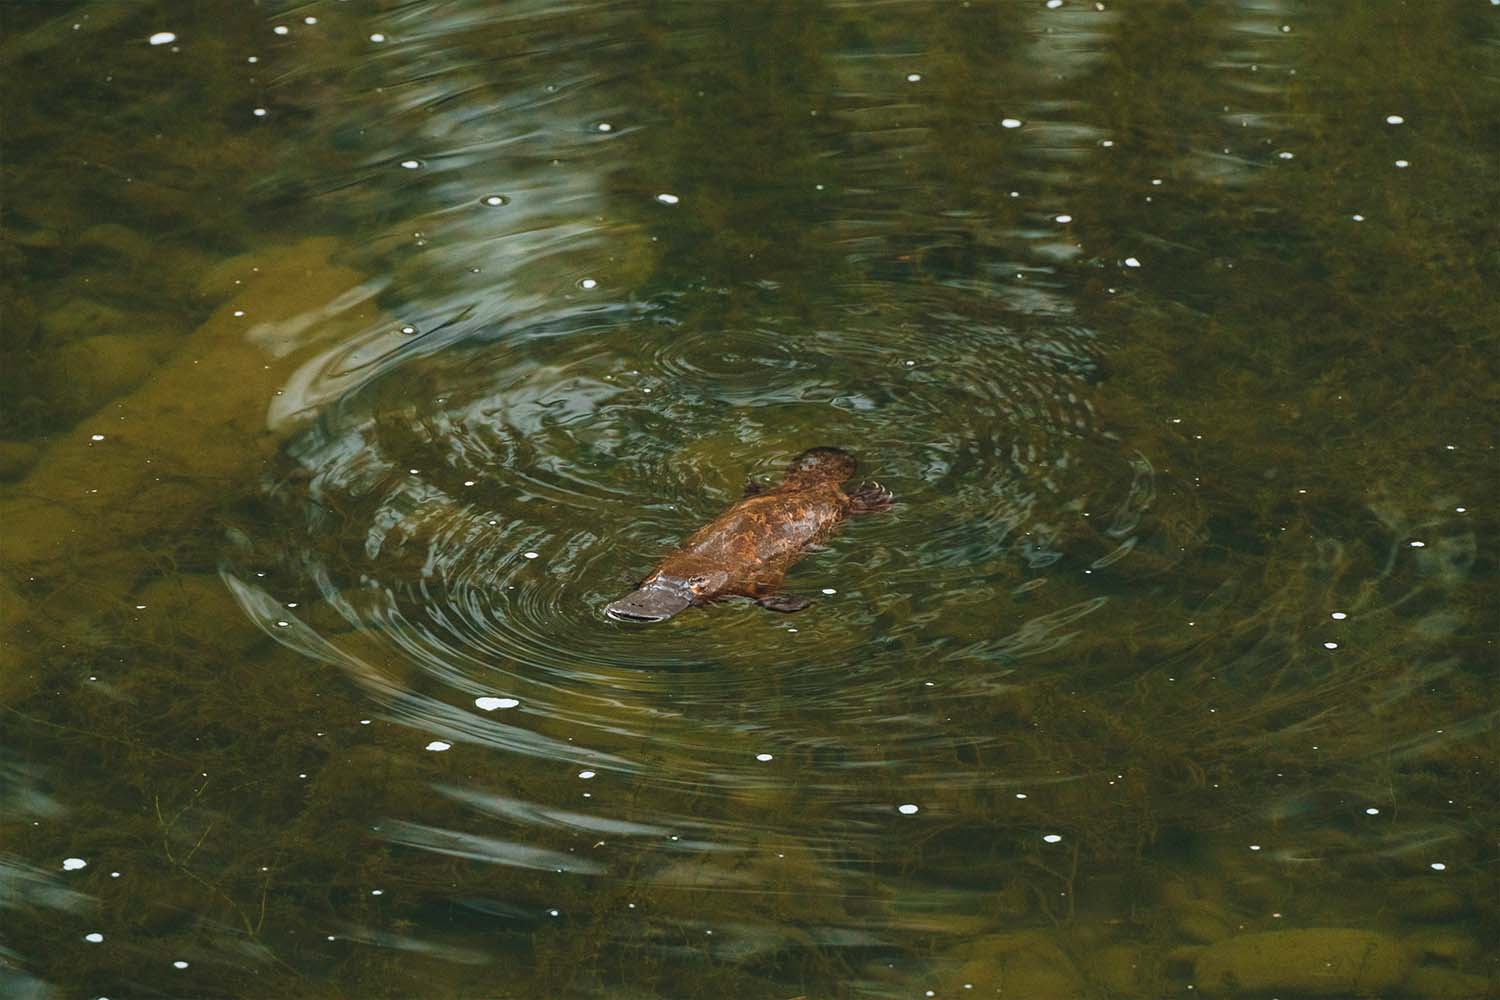 A platypus in the water